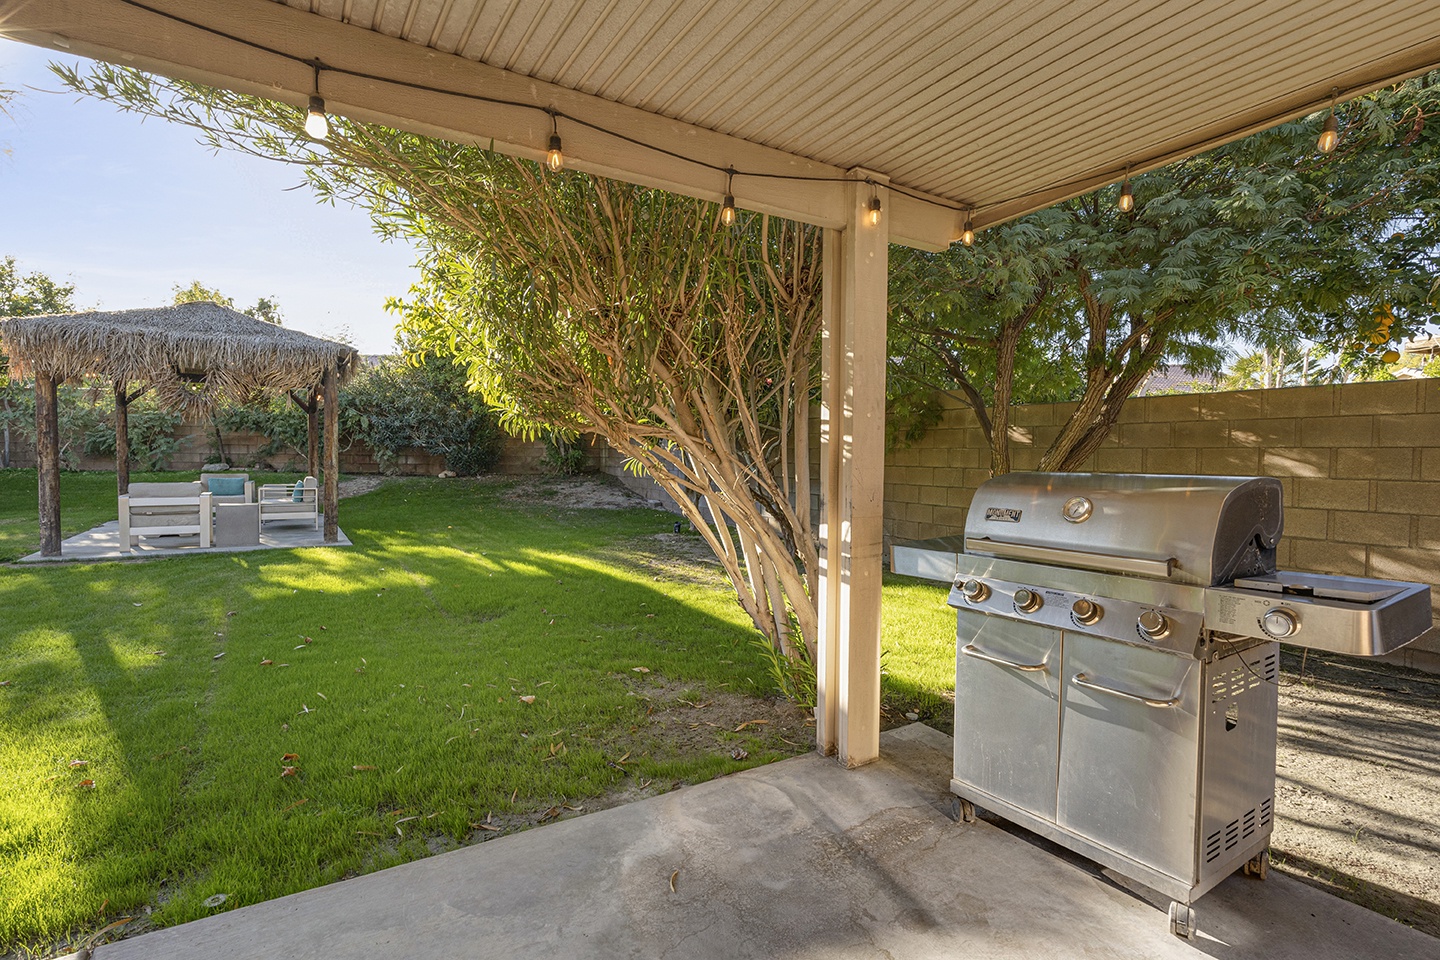 Dine al fresco on the covered patio with gas BBQ grill